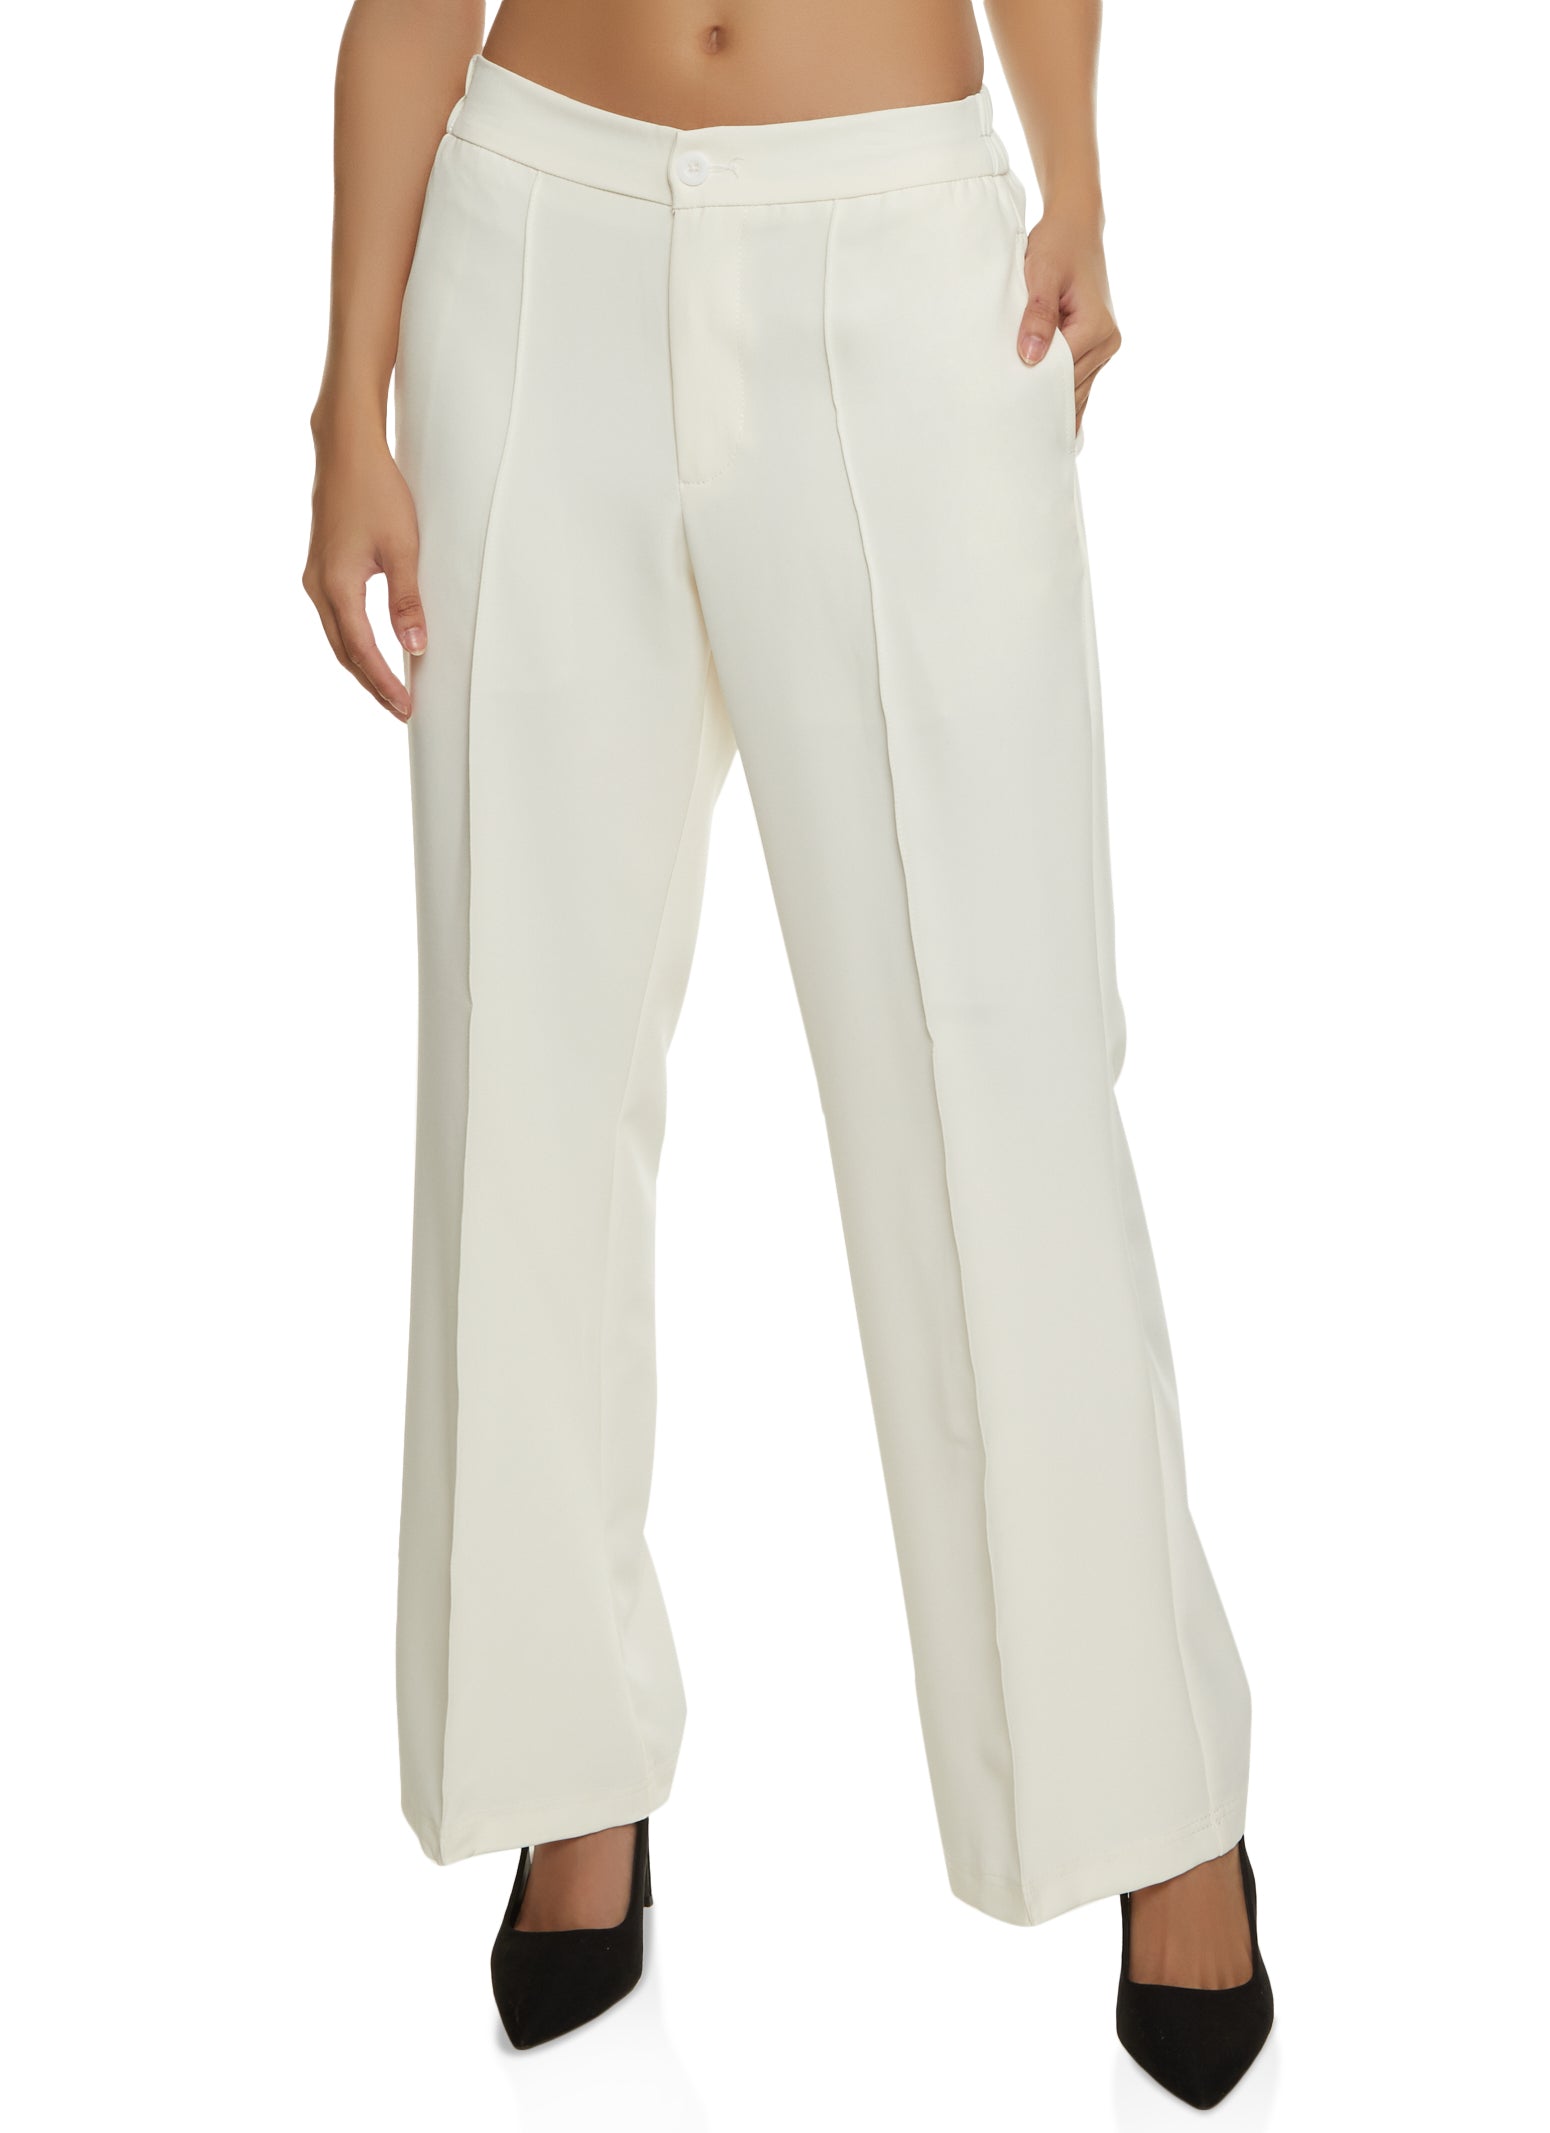 Buy Palazzo Pants for Girls Online At 30% Off - Go Colors